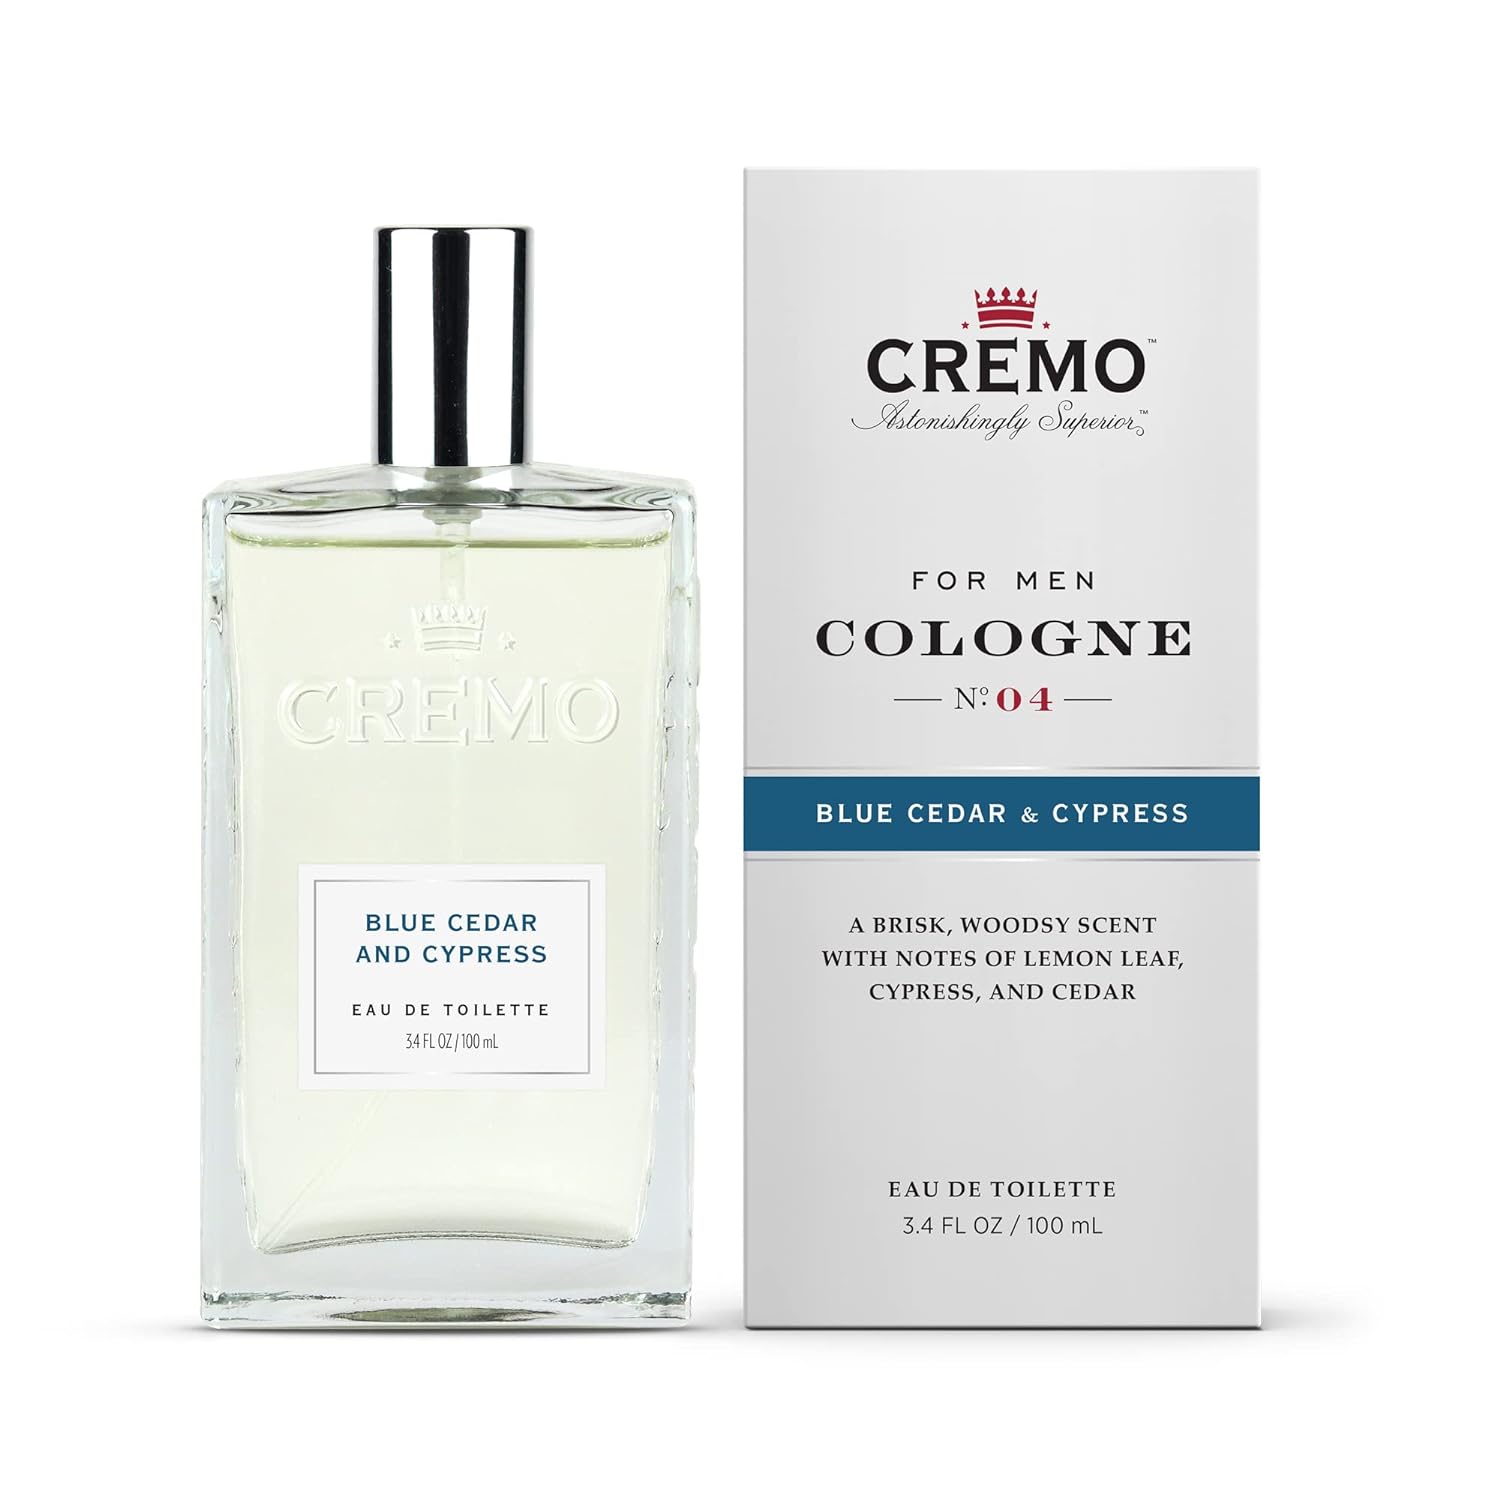 Cremo Blue Cedar & Cypress Cologne Spray, A Woodsy Scent with Notes of Lemon Leaf, Cypress and Cedar, 3.4 Fl Oz : Beauty & Personal Care